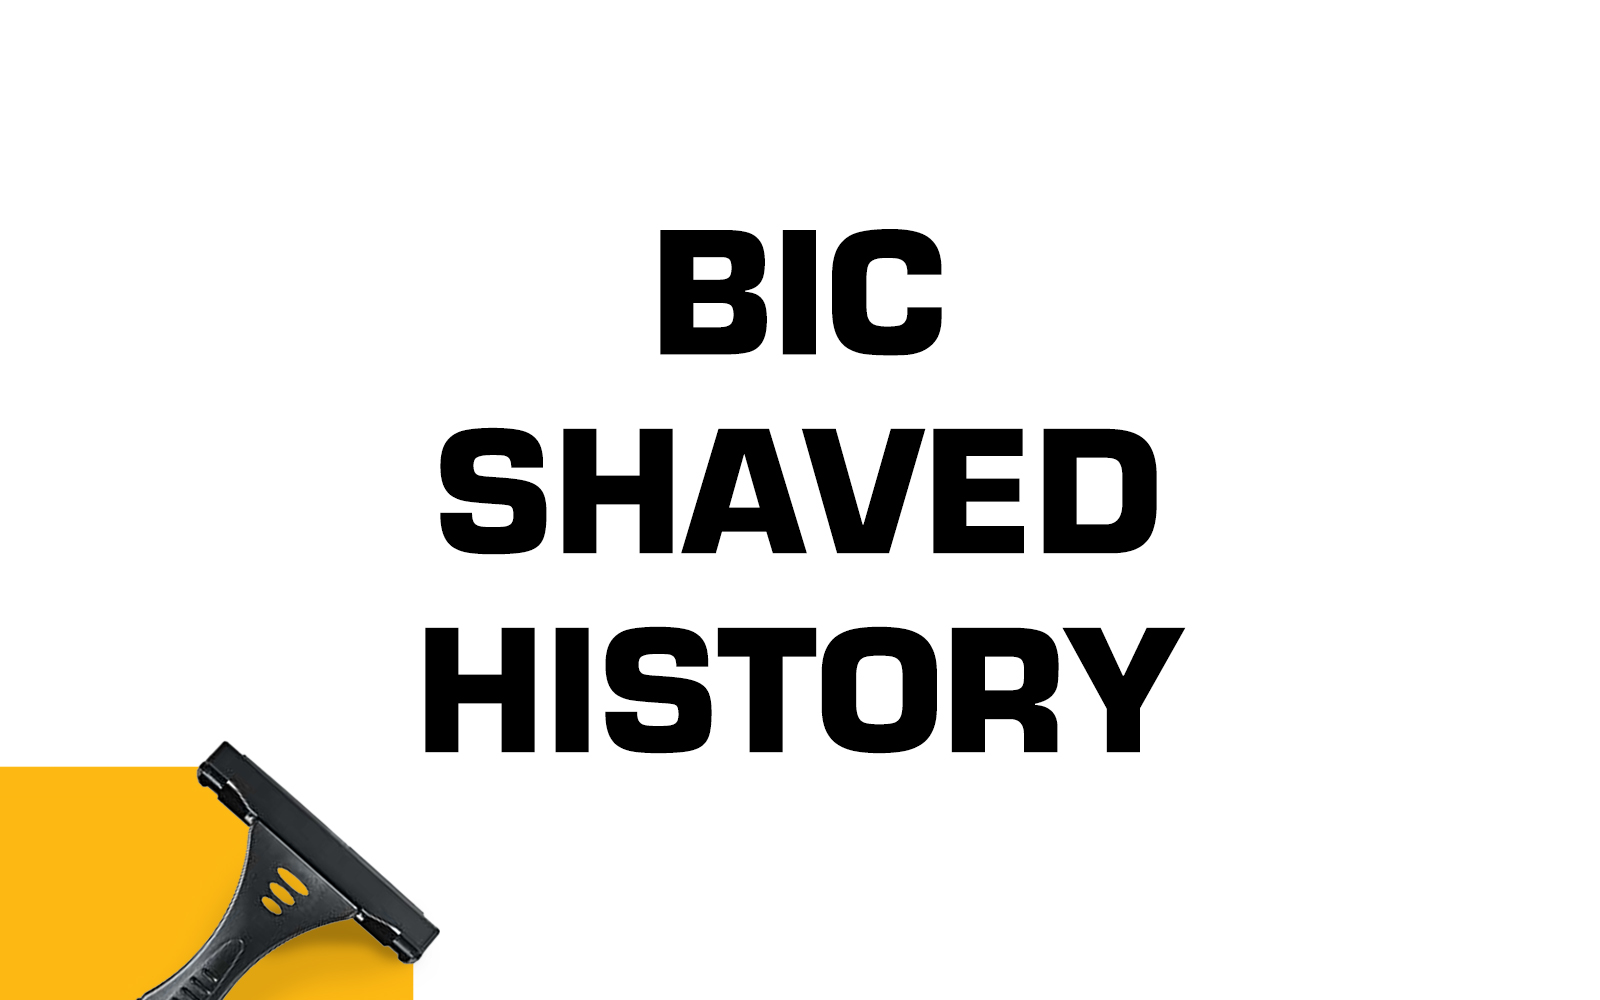 BIC shaved history 